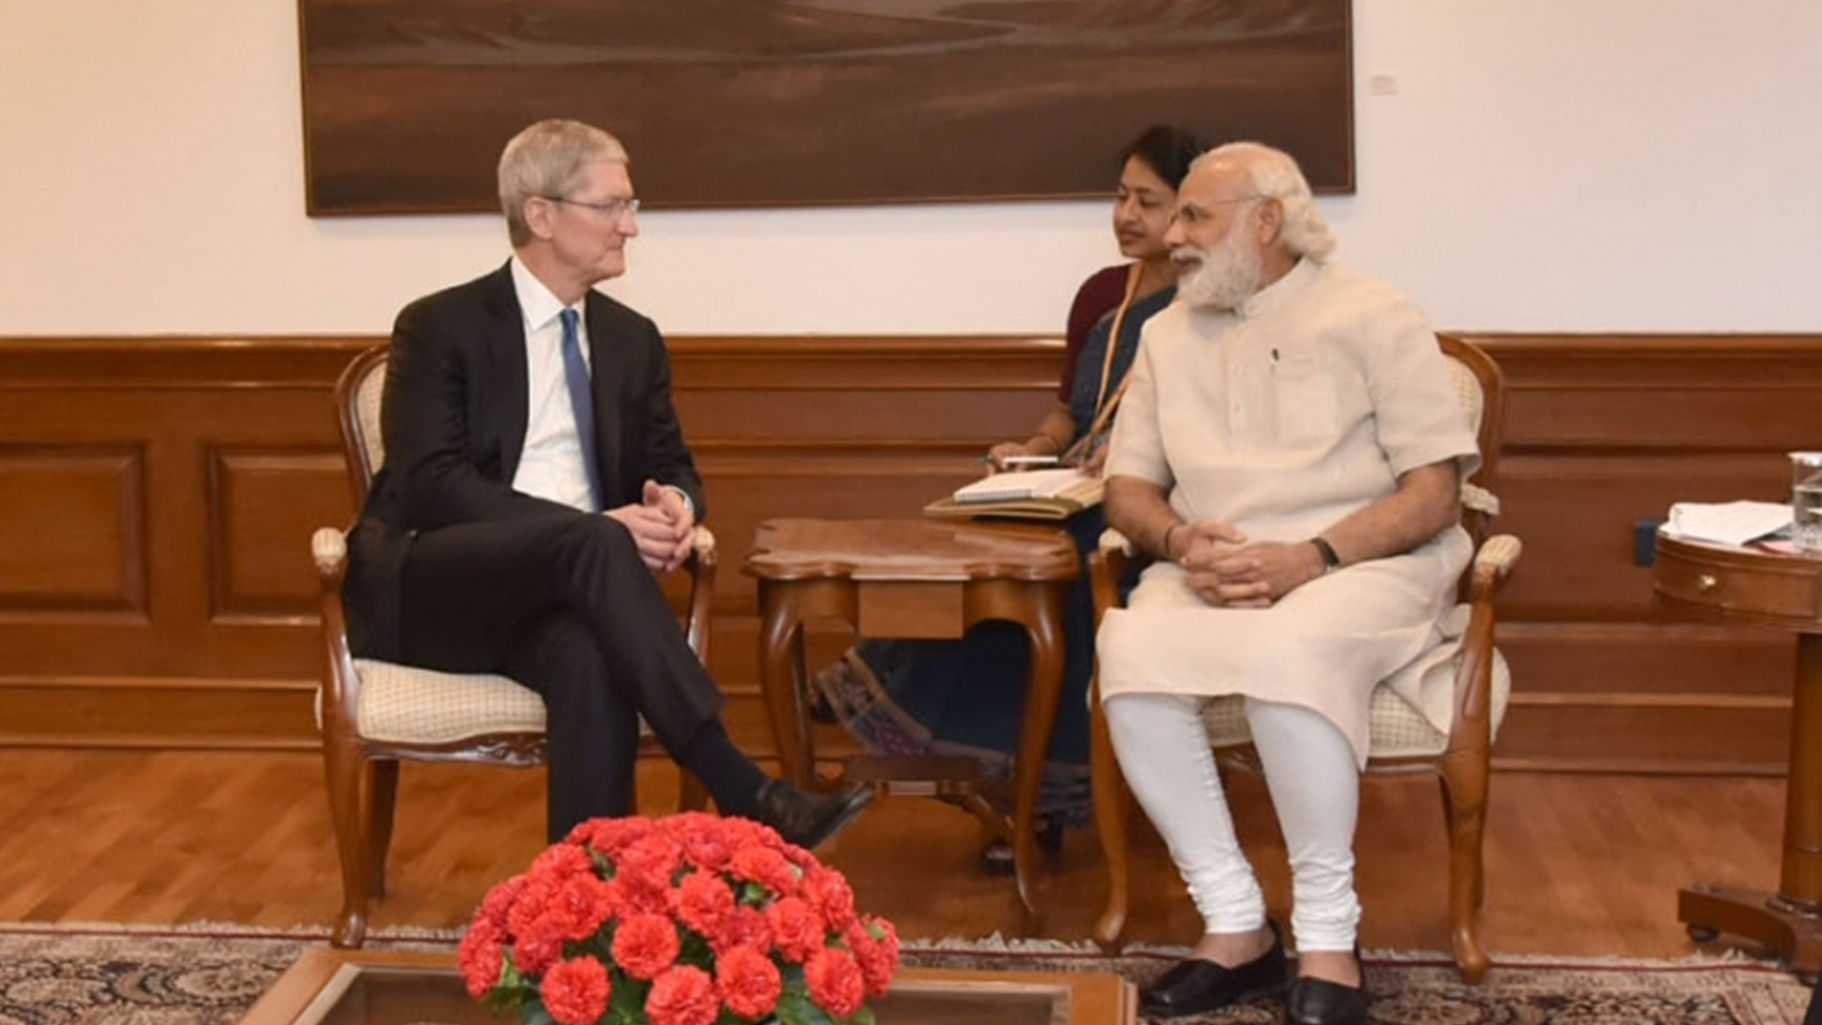 Apple CEO Tim Cook meets PM Modi in his residence in Delhi. (Photo: IANS/PIB)